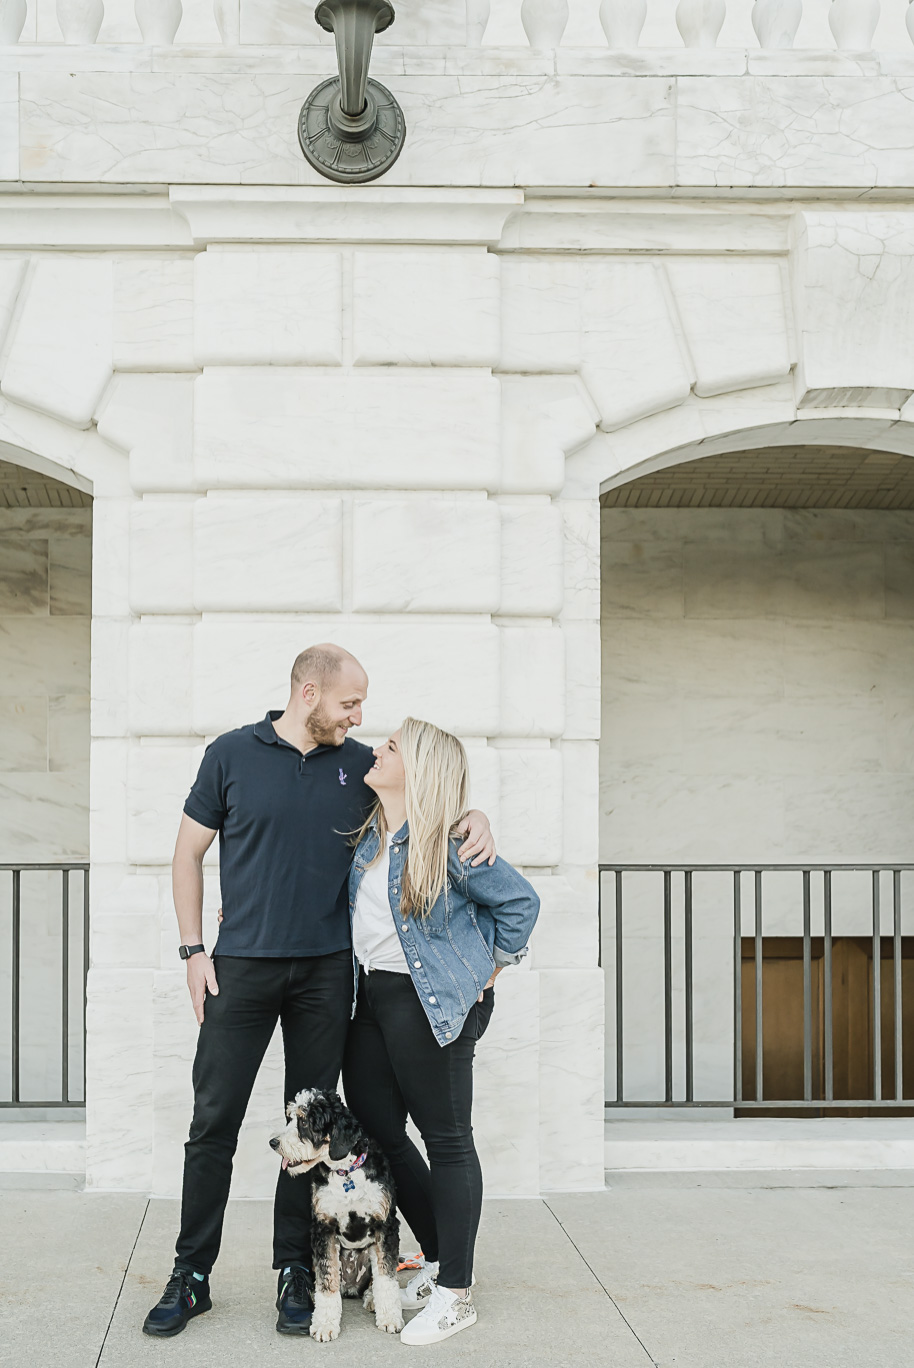 Downtown Detroit Engagement Pictures in Detroit Michigan provided by Kari Dawson Photography top-rated Detroit Wedding Photographer.